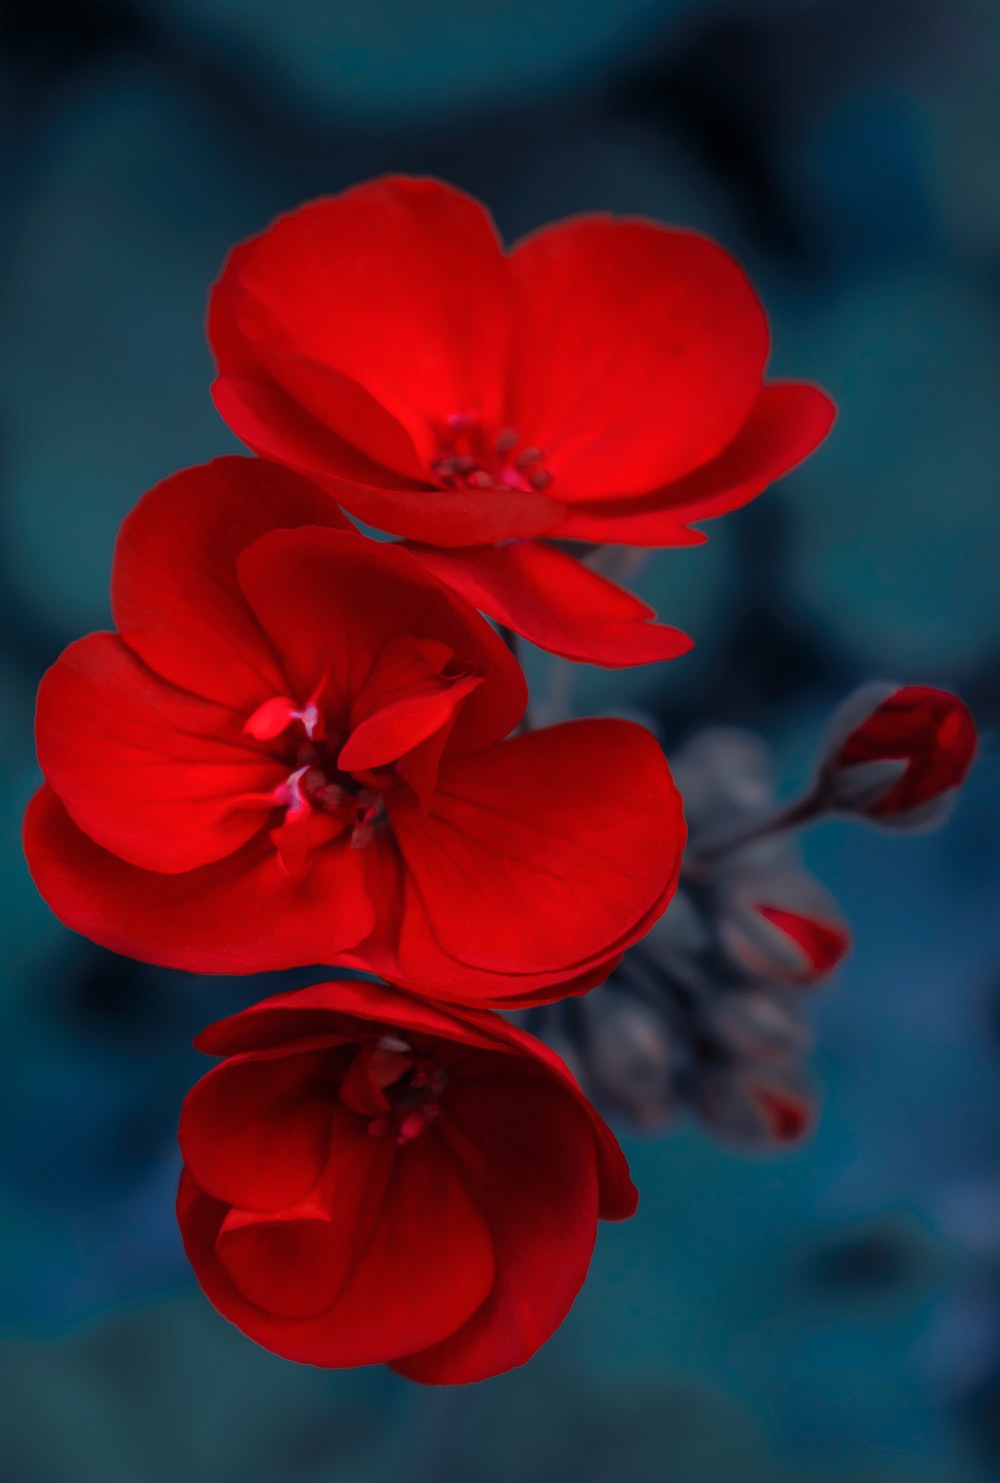 Red Flower Pictures Image